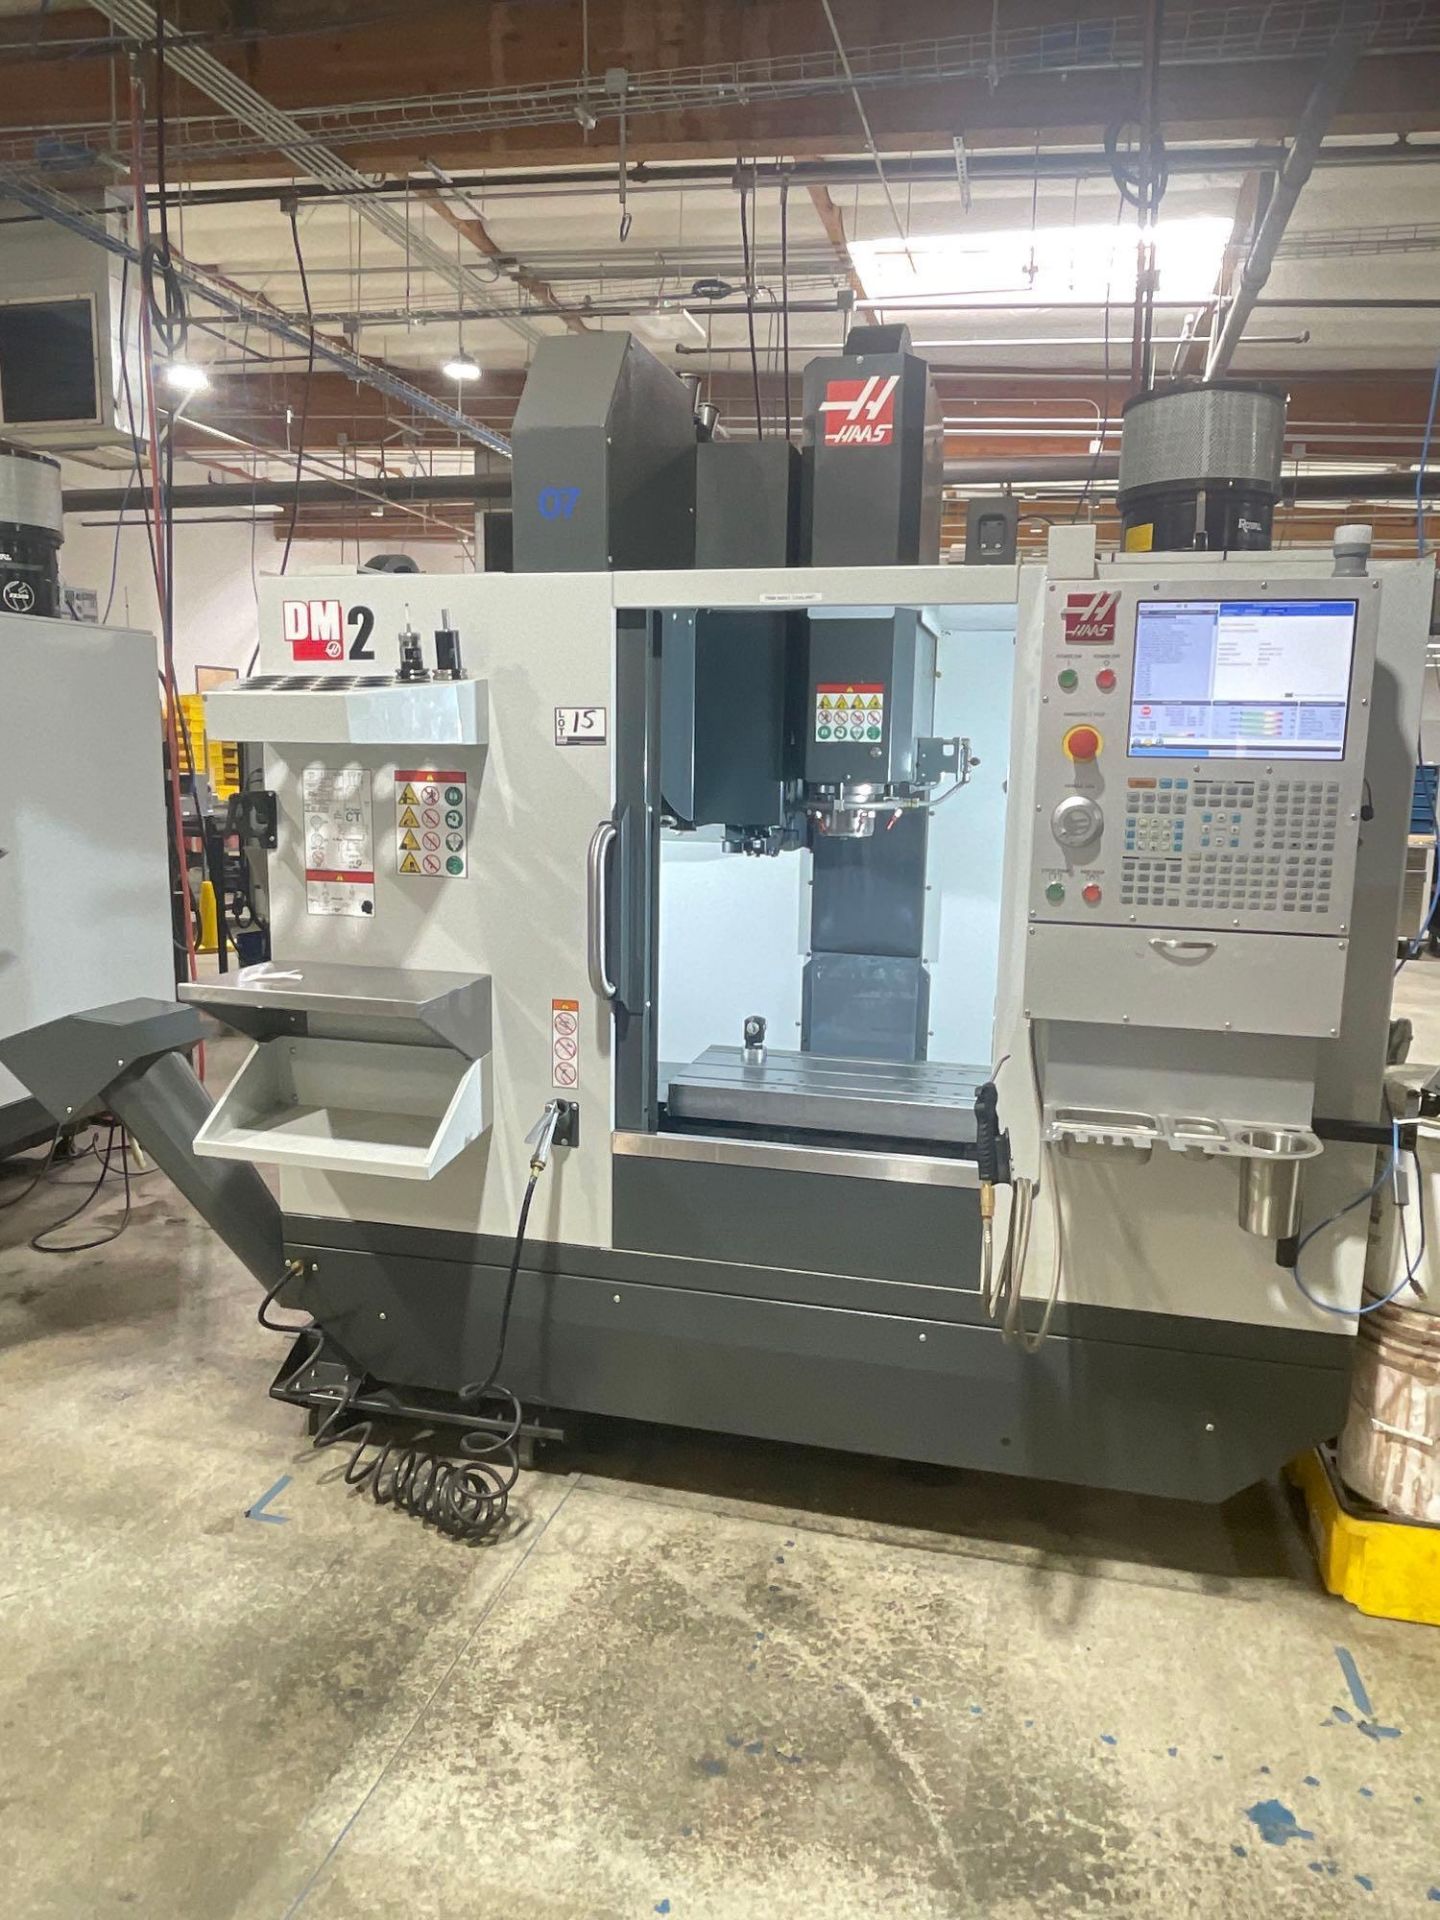 Haas DM-2, 28” x 16” x 15.5” Travels, CT 40, 18+1 SMTC, CTS, WIPS, as New as 2021 - Image 3 of 12